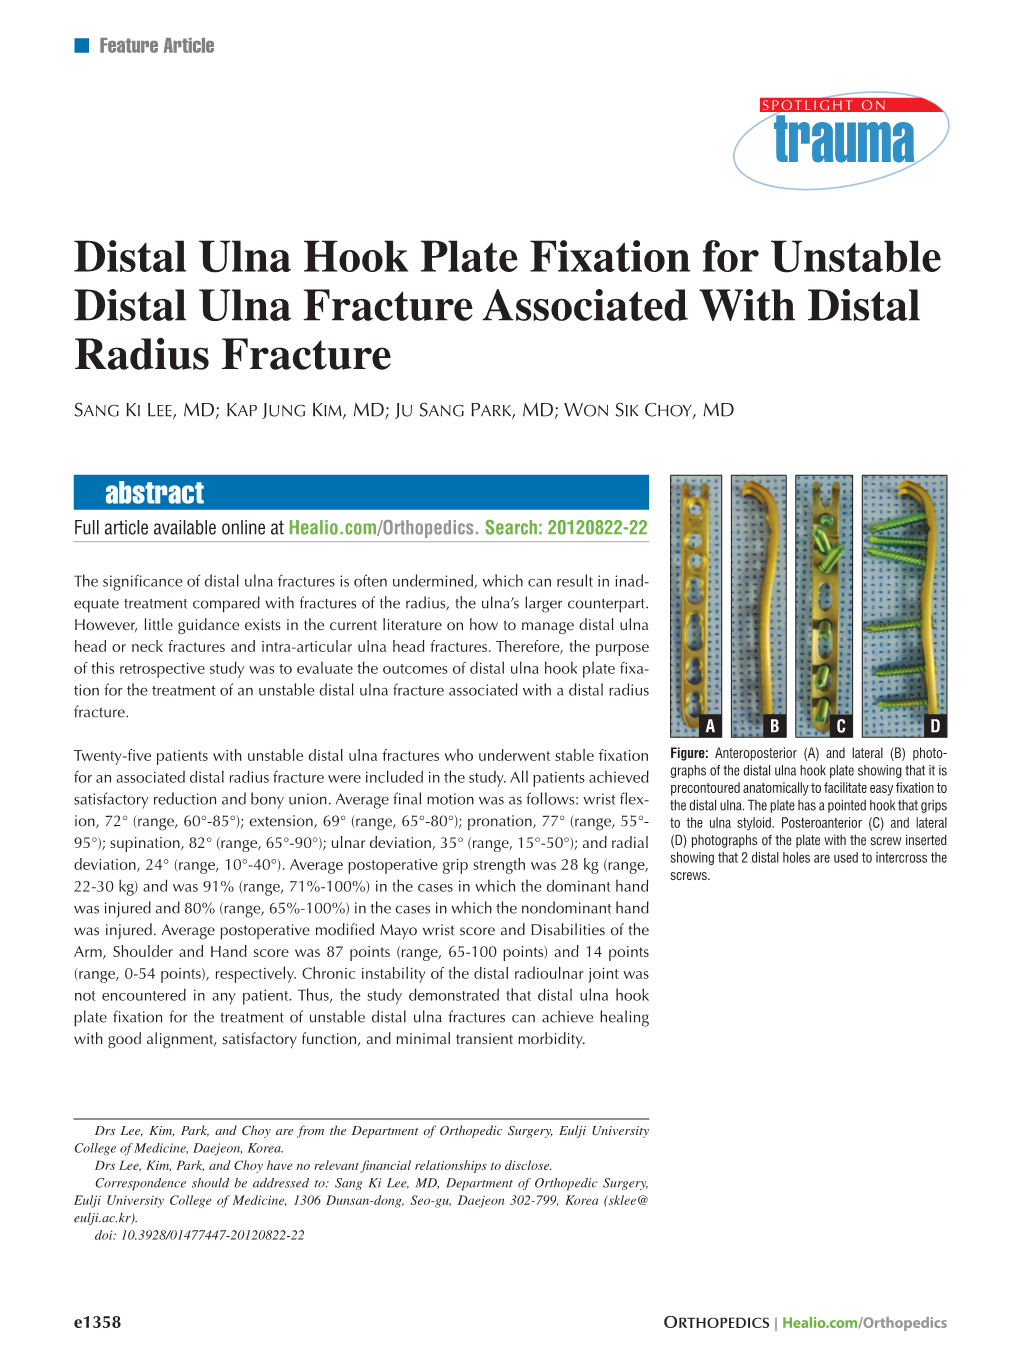 Distal Ulna Hook Plate Fixation for Unstable Distal Ulna Fracture Associated with Distal Radius Fracture